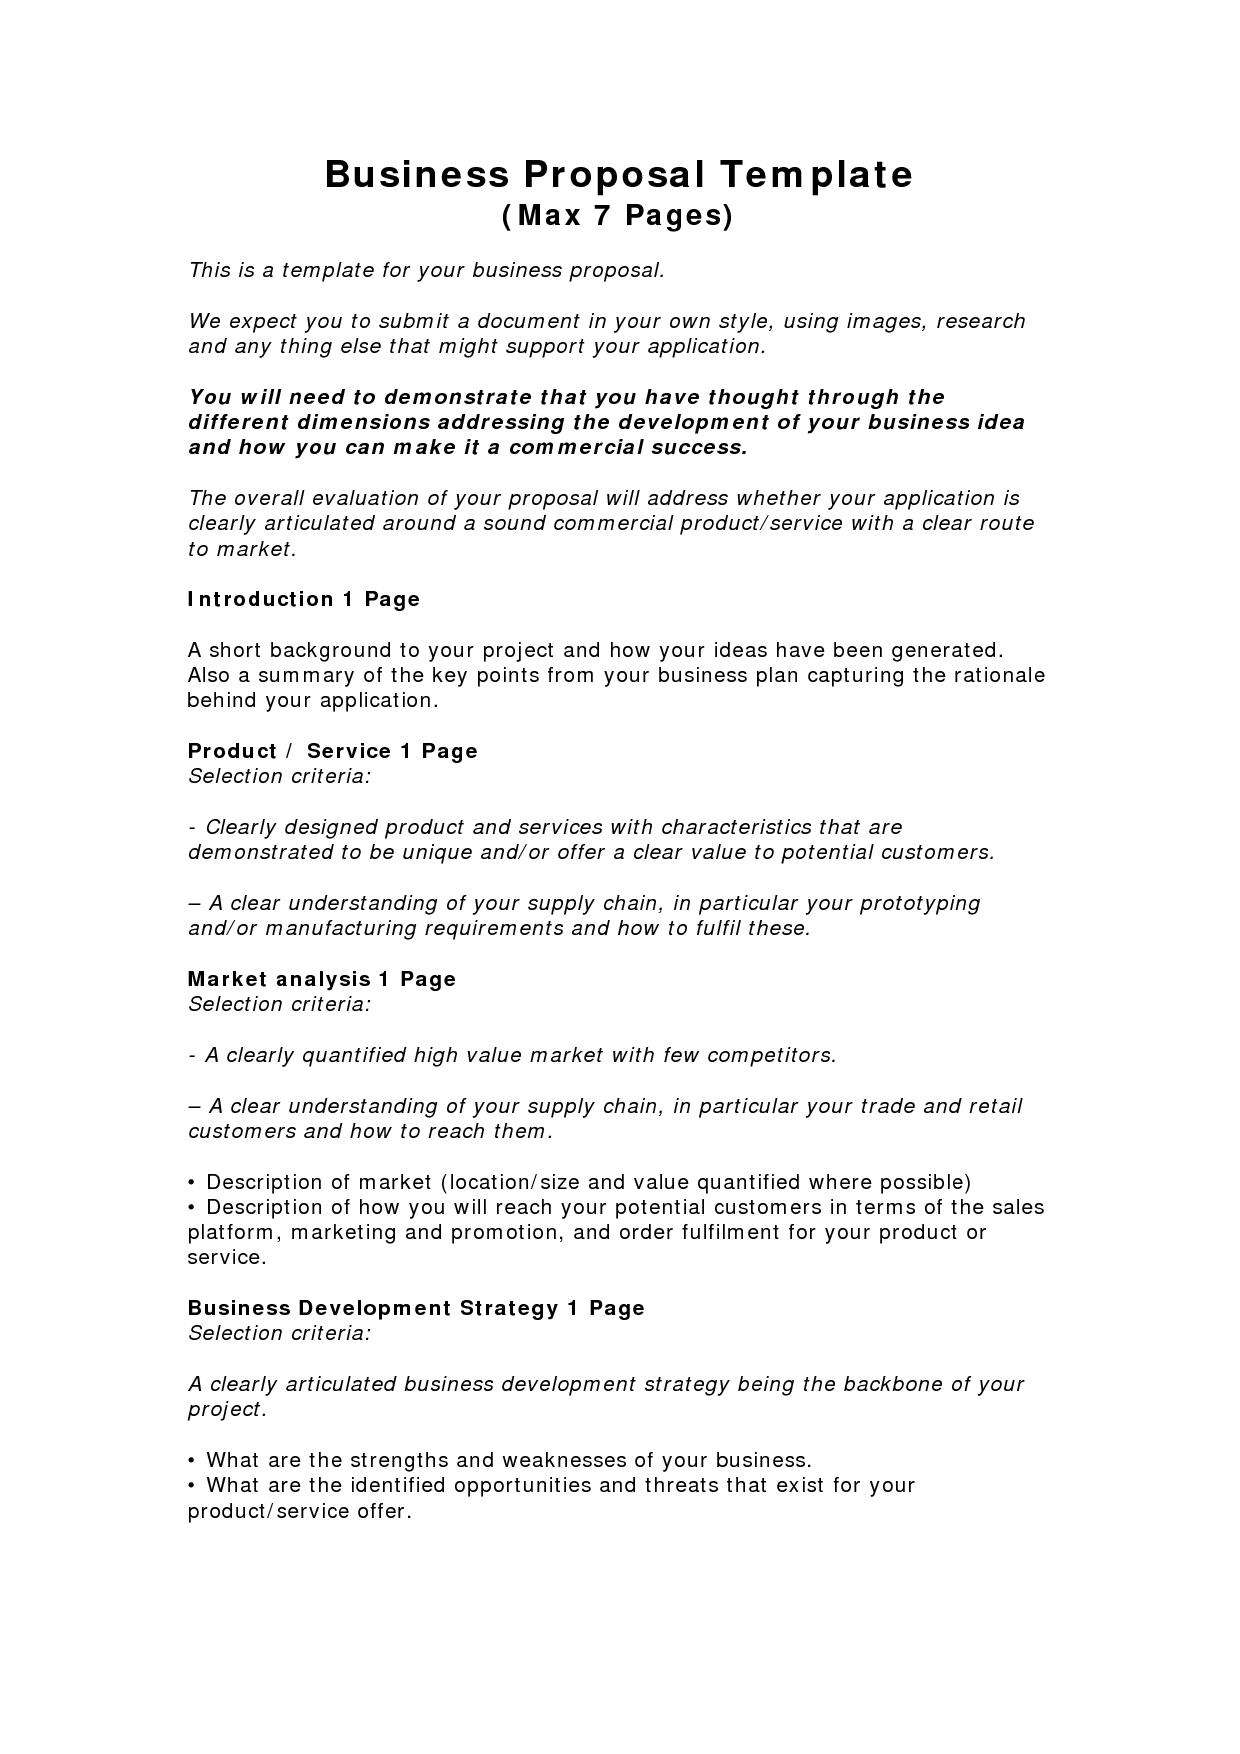 Business Proposal Templates Examples | Business Proposal Intended For Free Business Proposal Template Ms Word